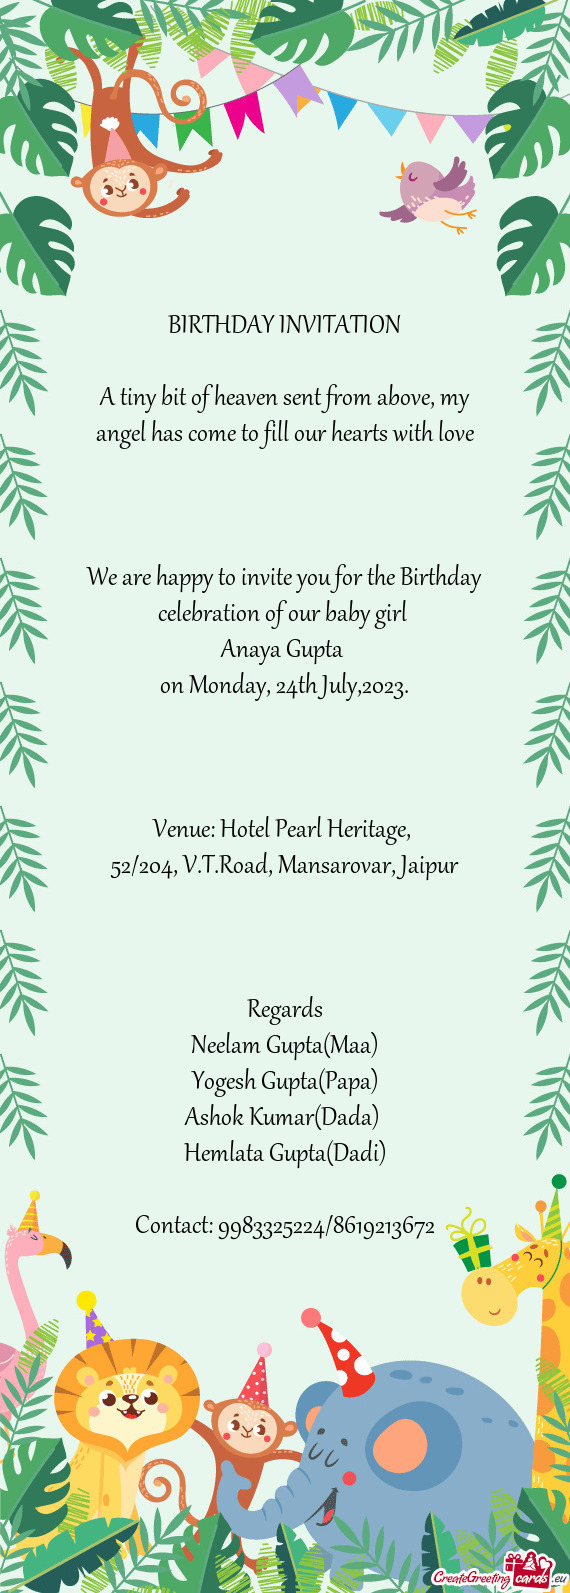 We are happy to invite you for the Birthday celebration of our baby girl